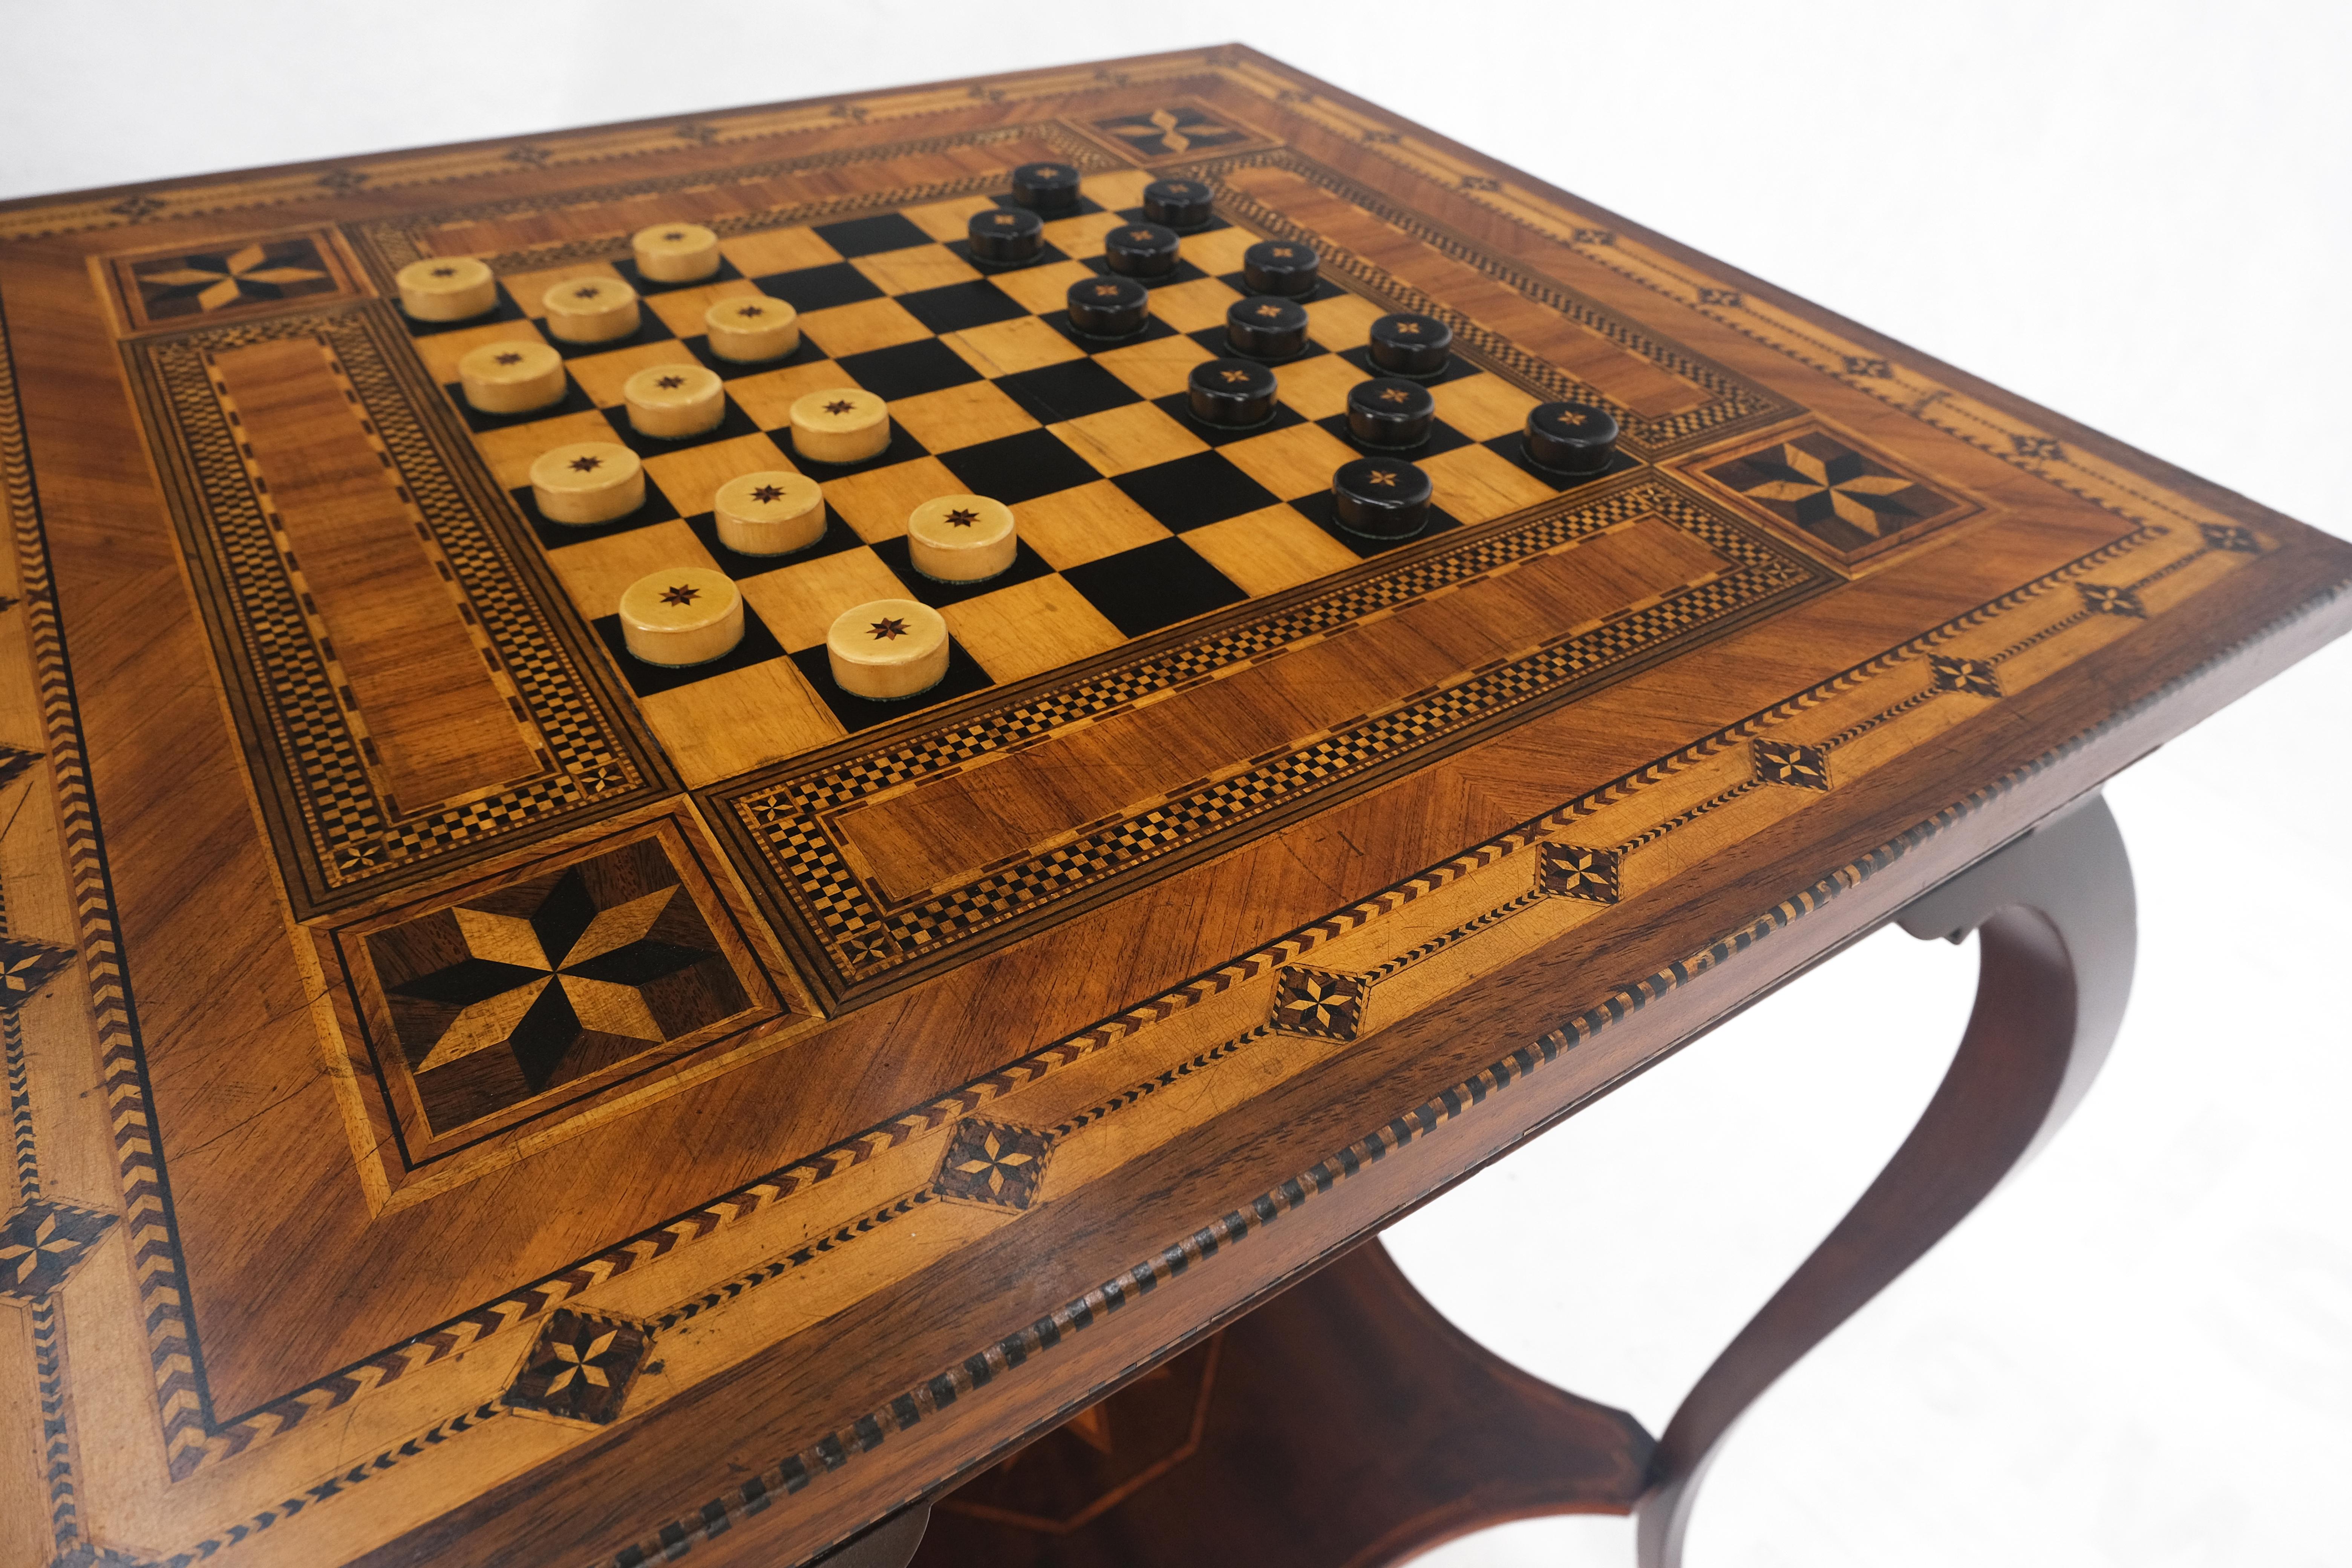 Very Fine Antique Dated !910 Inlay Checkerboard Two Tier Game Table Very Clean.
This table is made out of 12648 pieces of wood.